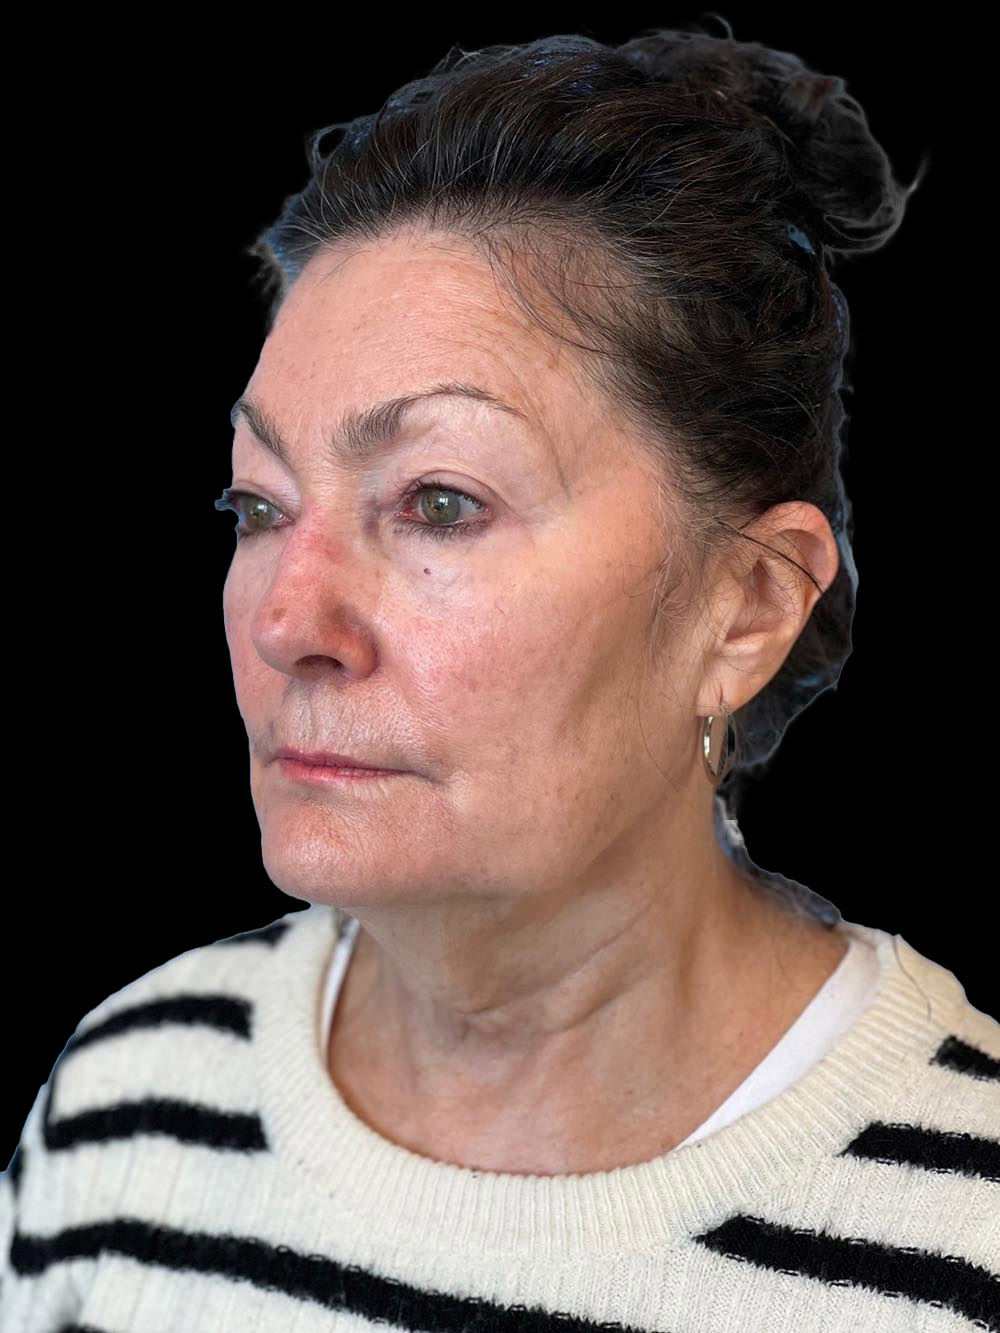 Photo of the patient’s face before the Facelift surgery. Patient 5 - Set 2